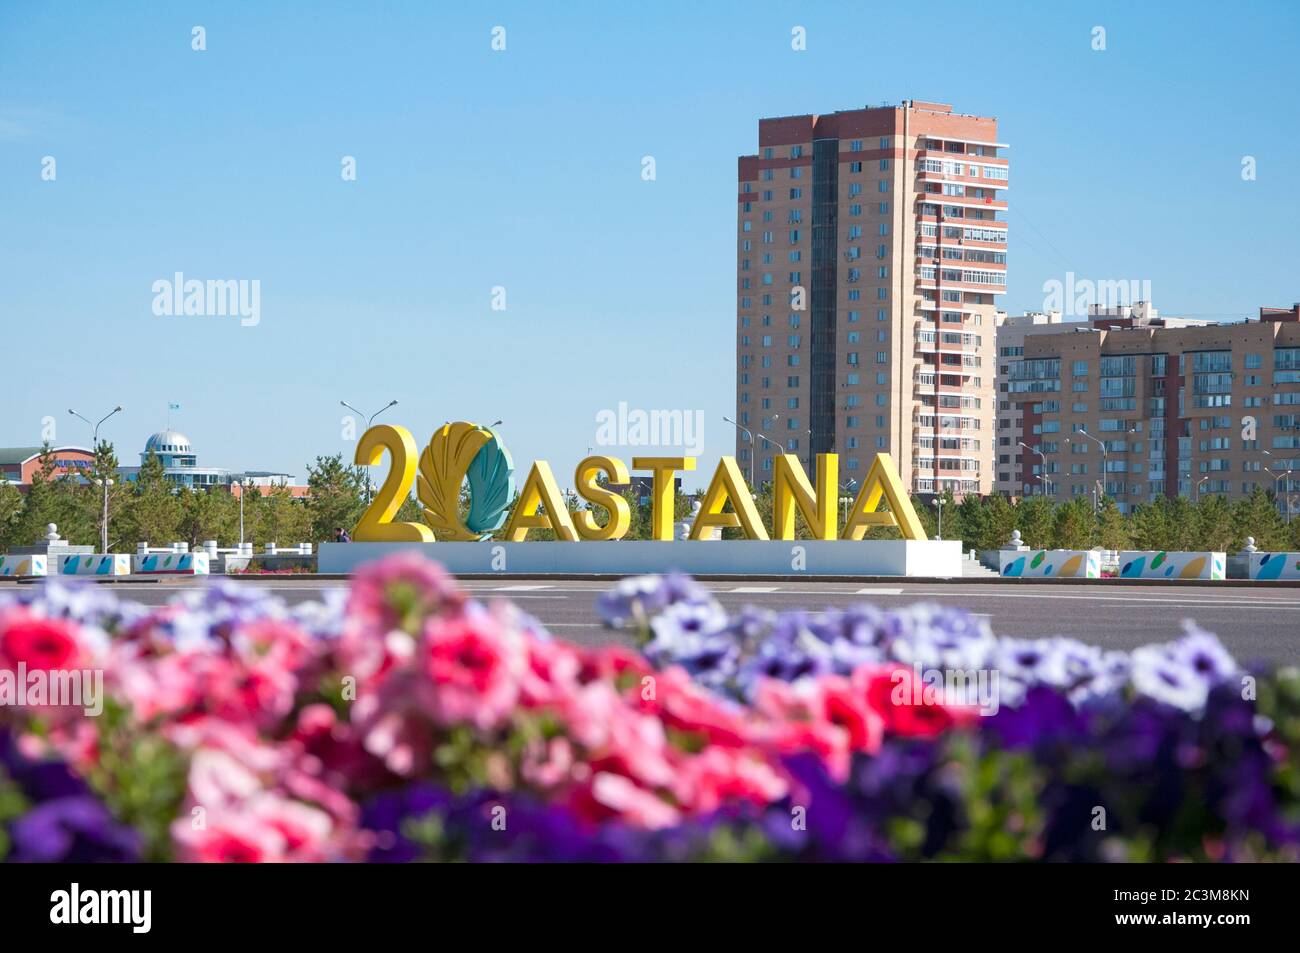 20 years sign monument in Astana, capital of Kazakhstan Stock Photo